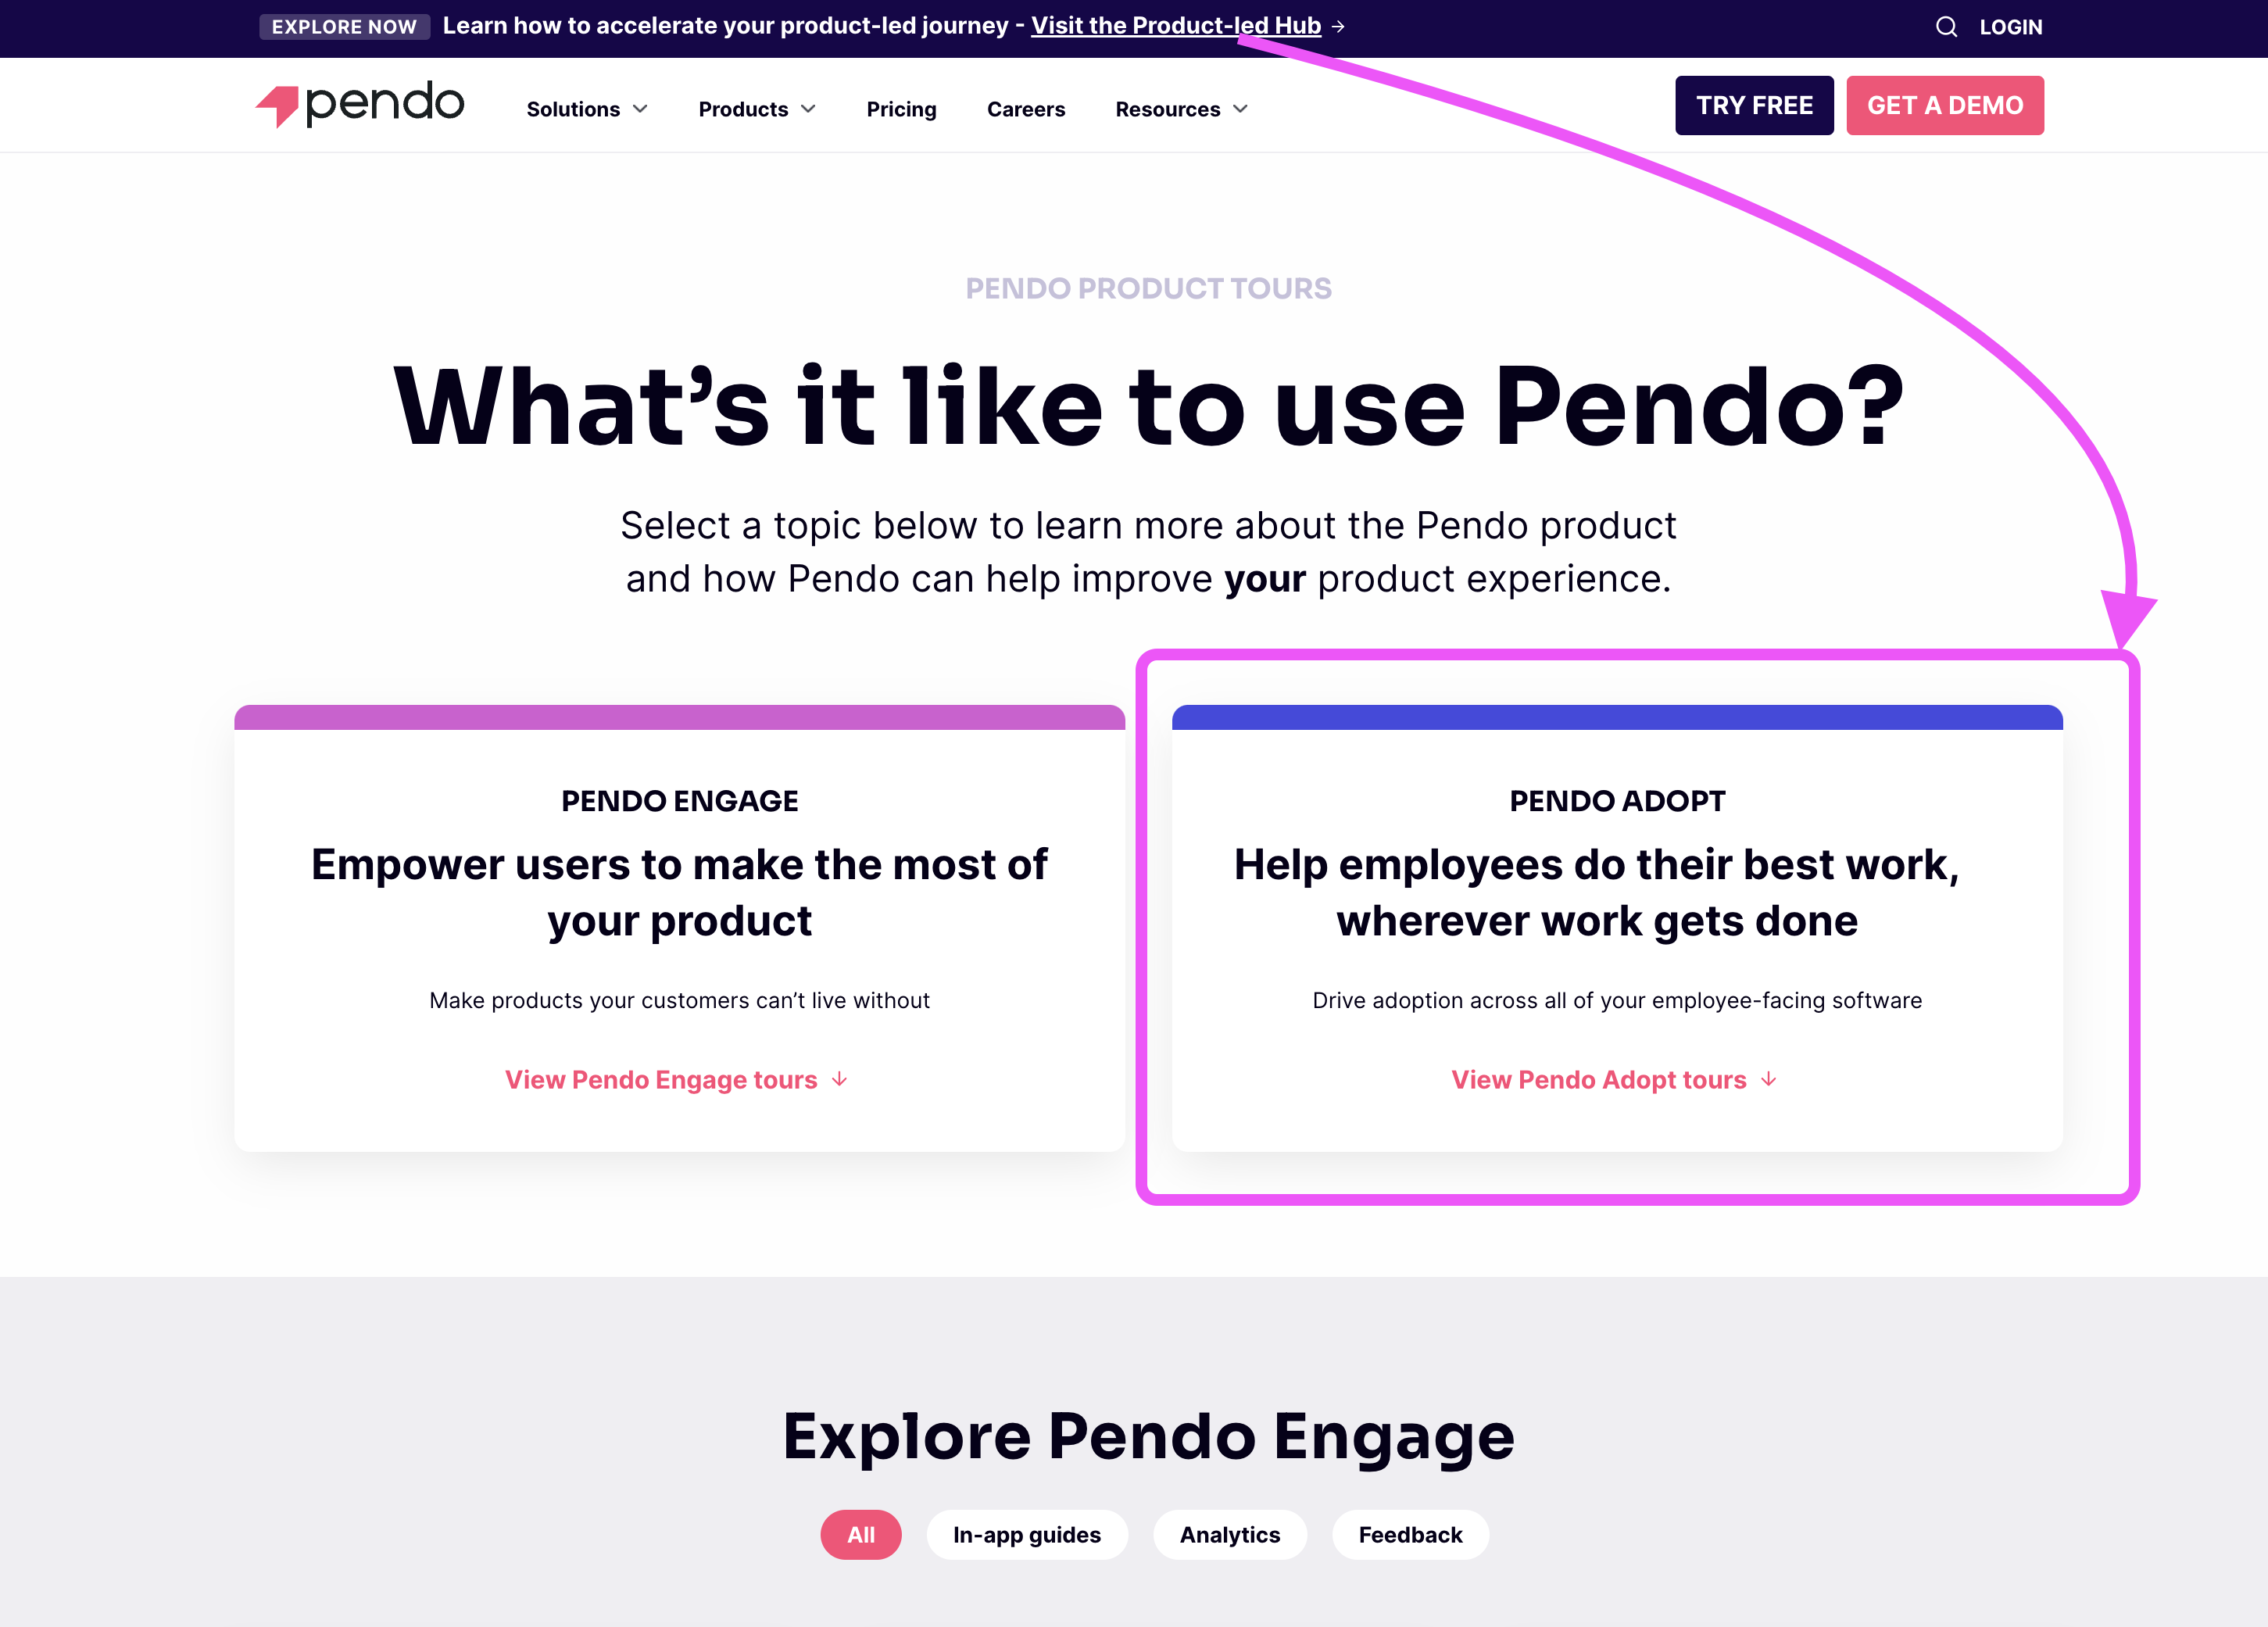 pendo product led growth strategy